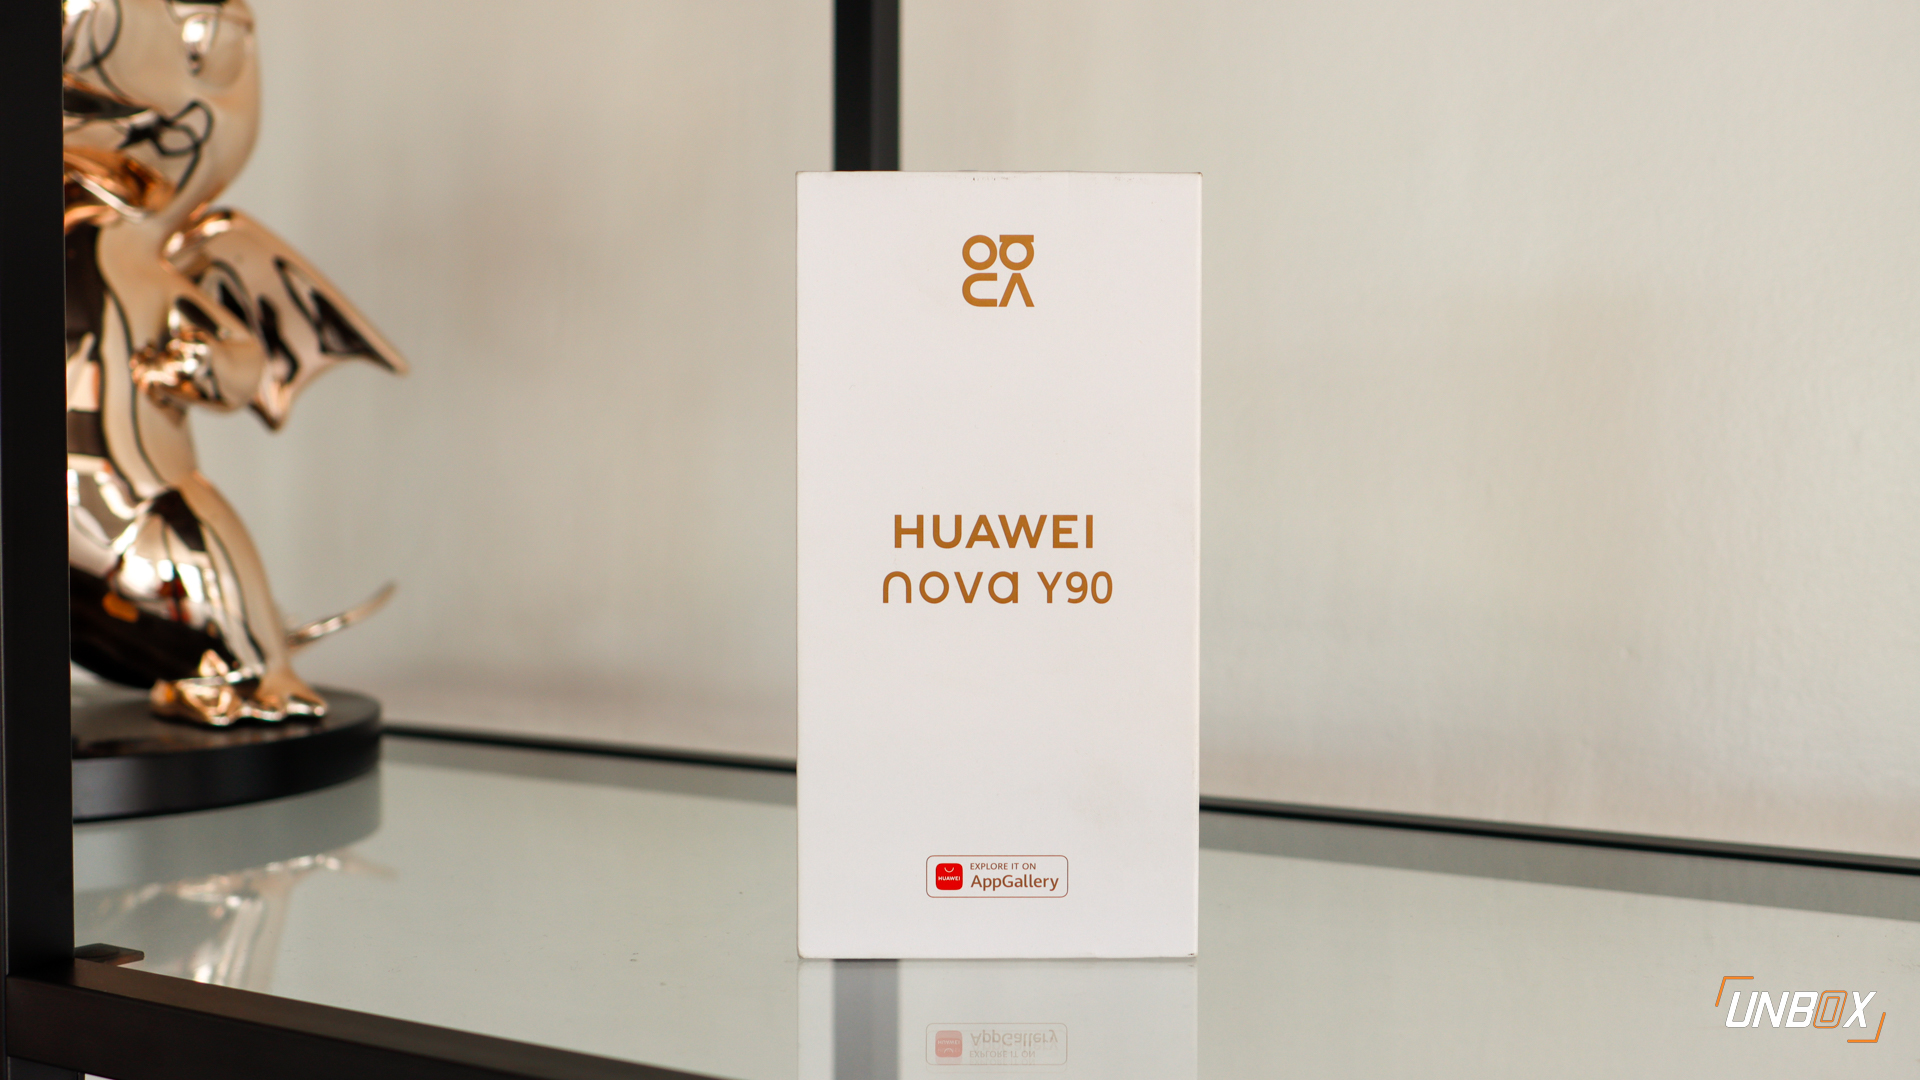 Huawei Announces Price, Pre-order of nova Y90 in the Philippin